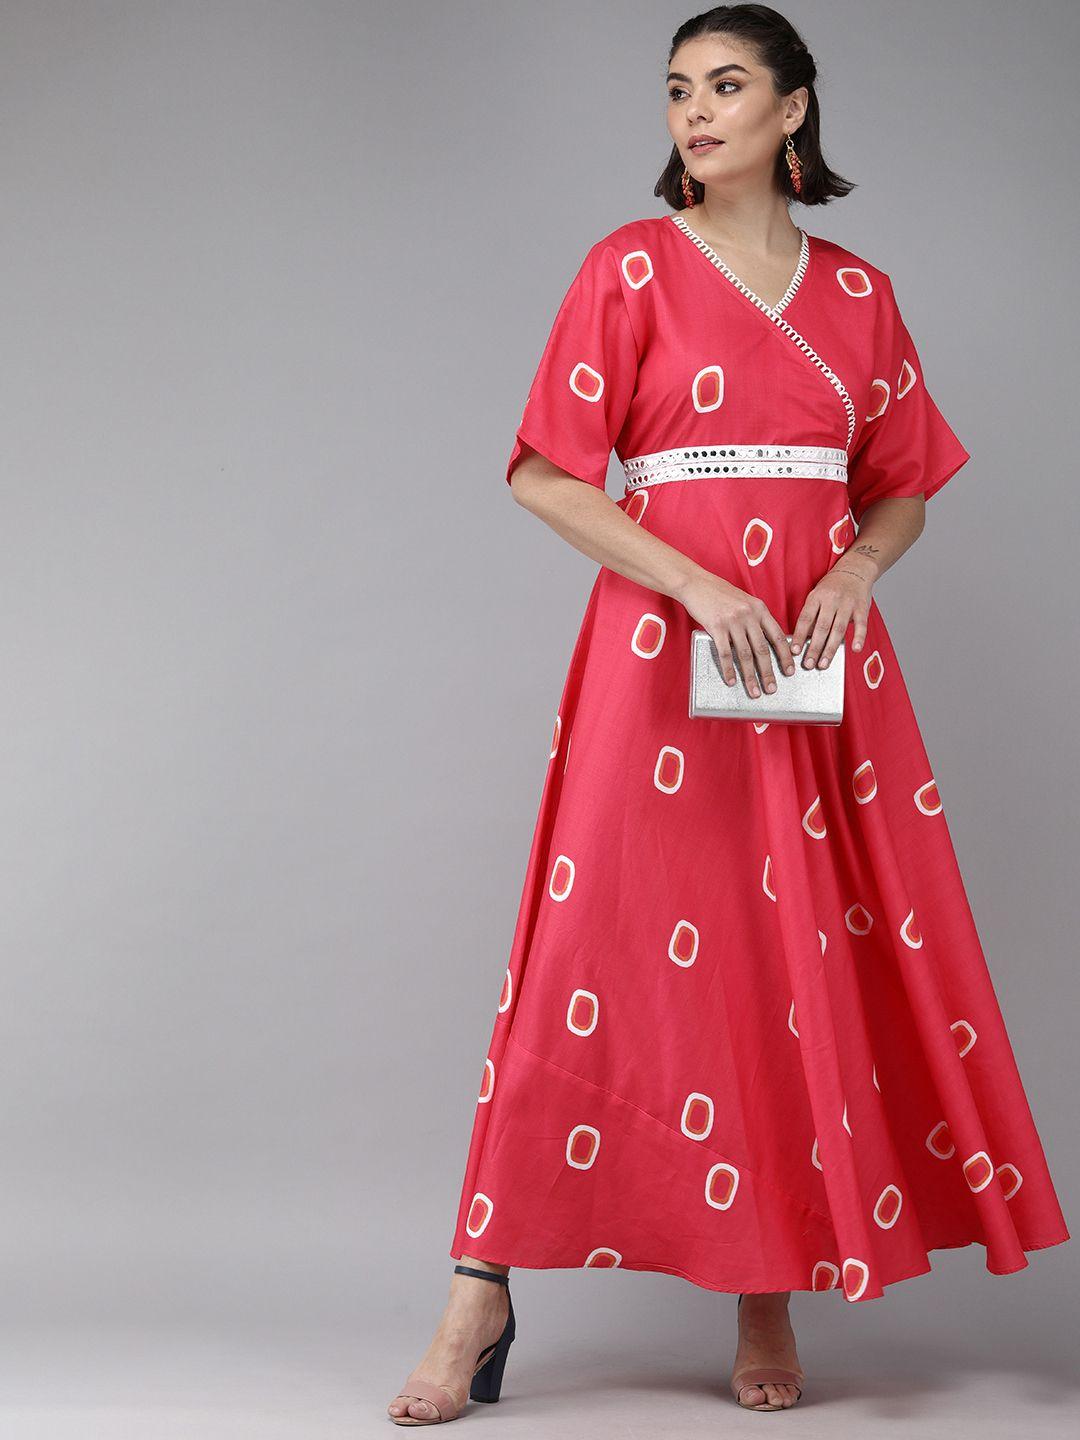 bhama-couture-pink-fit-&-flare-maxi-dress